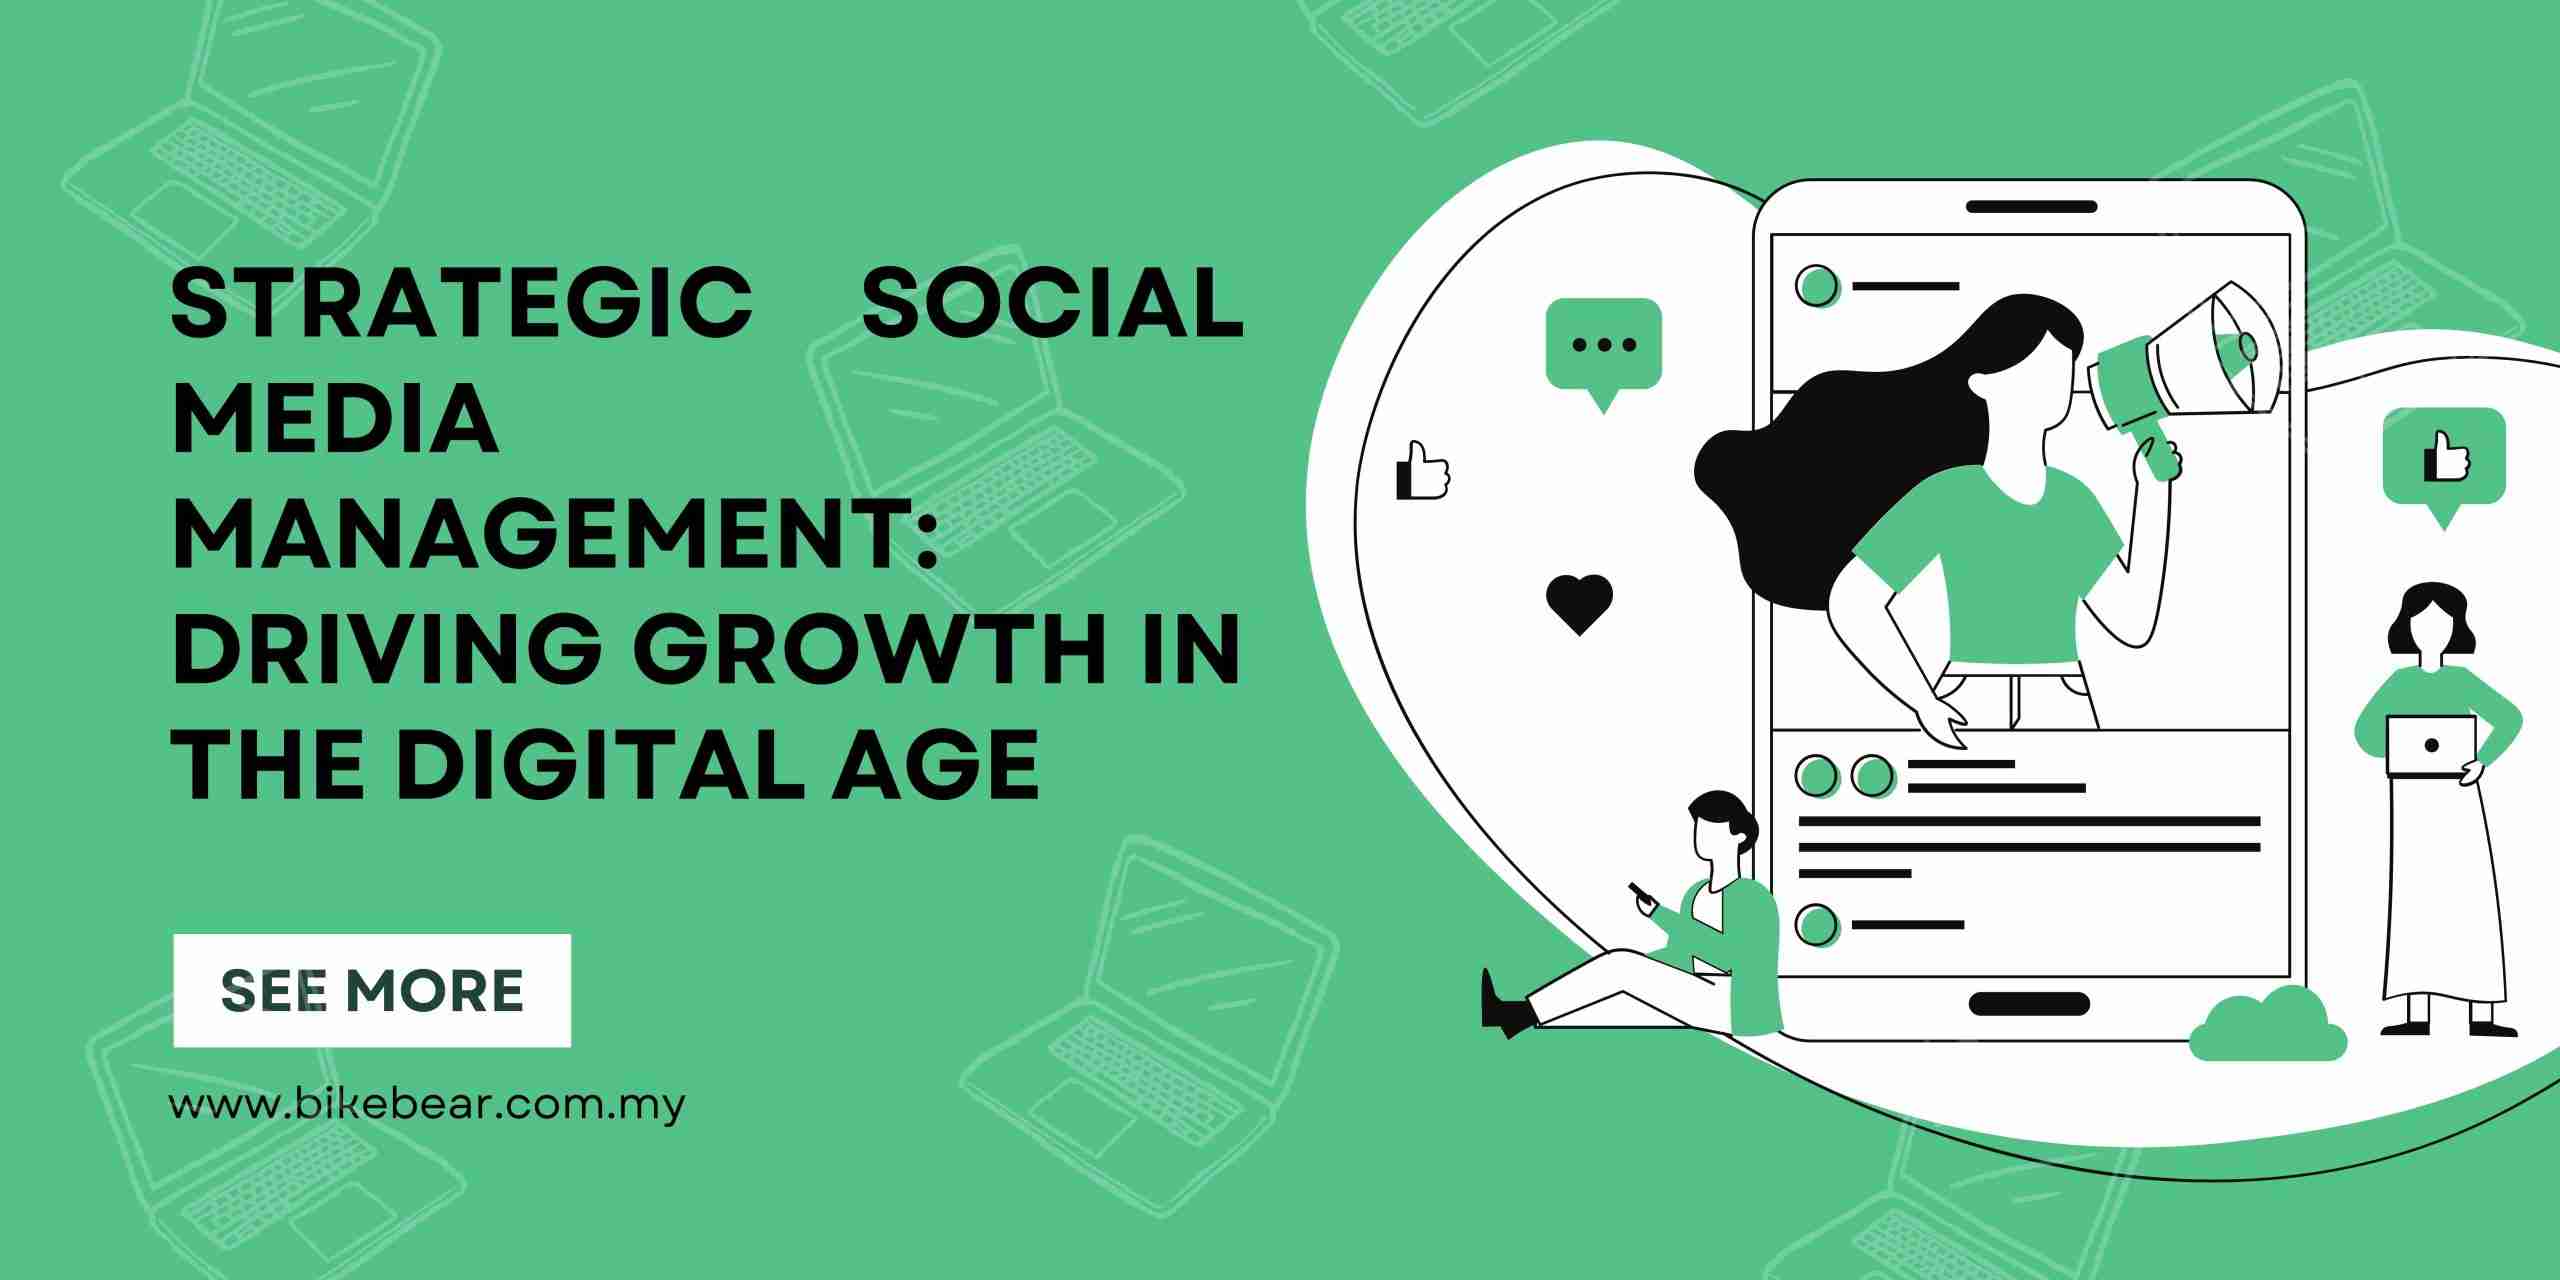 Strategic Social Media Management: Driving Growth in the Digital Age